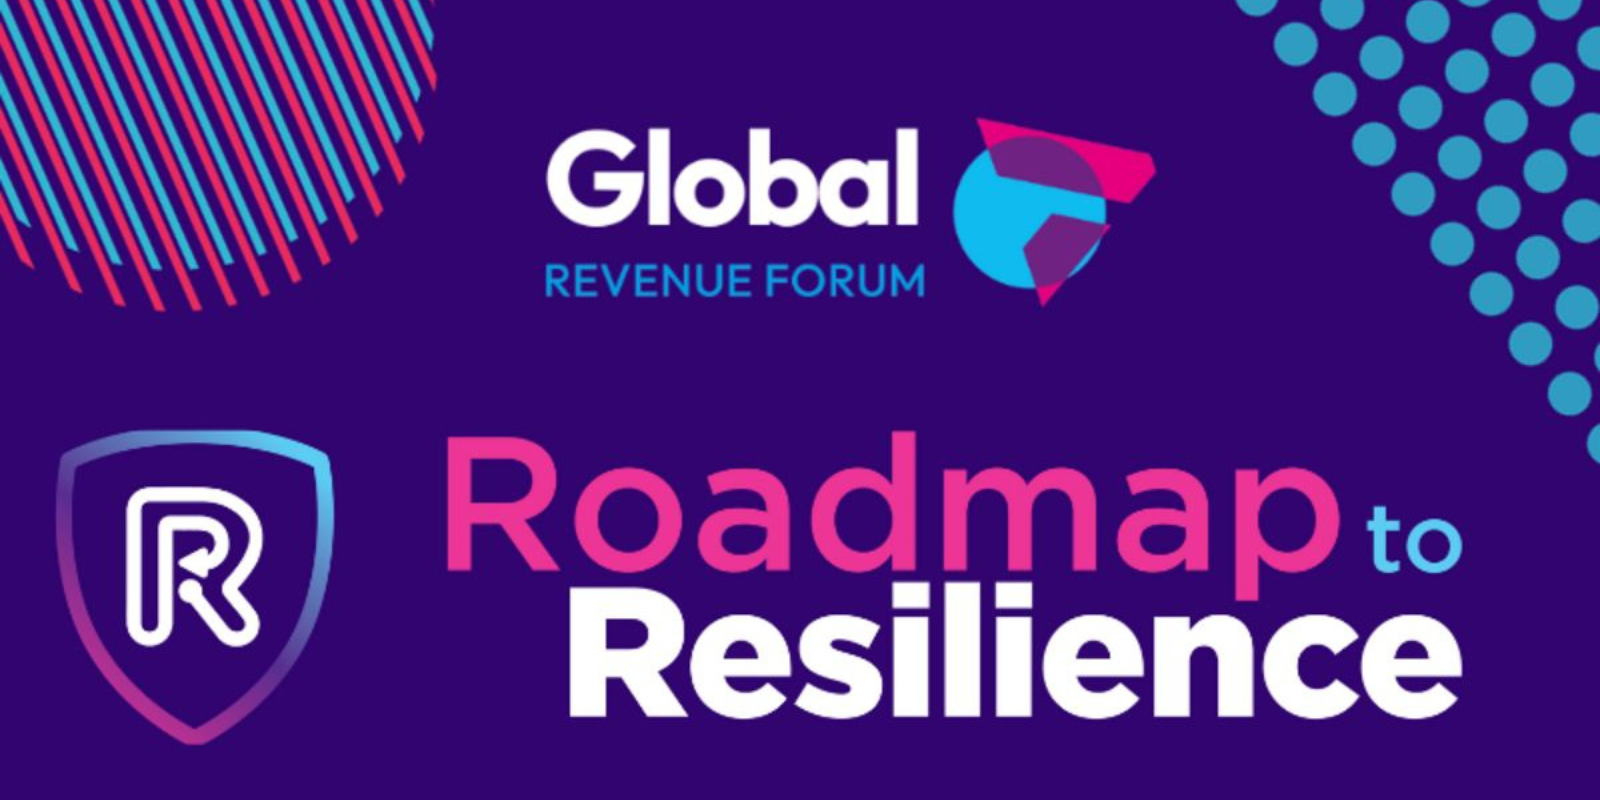 a purple background with the words global revenue forum roadmap to resilience